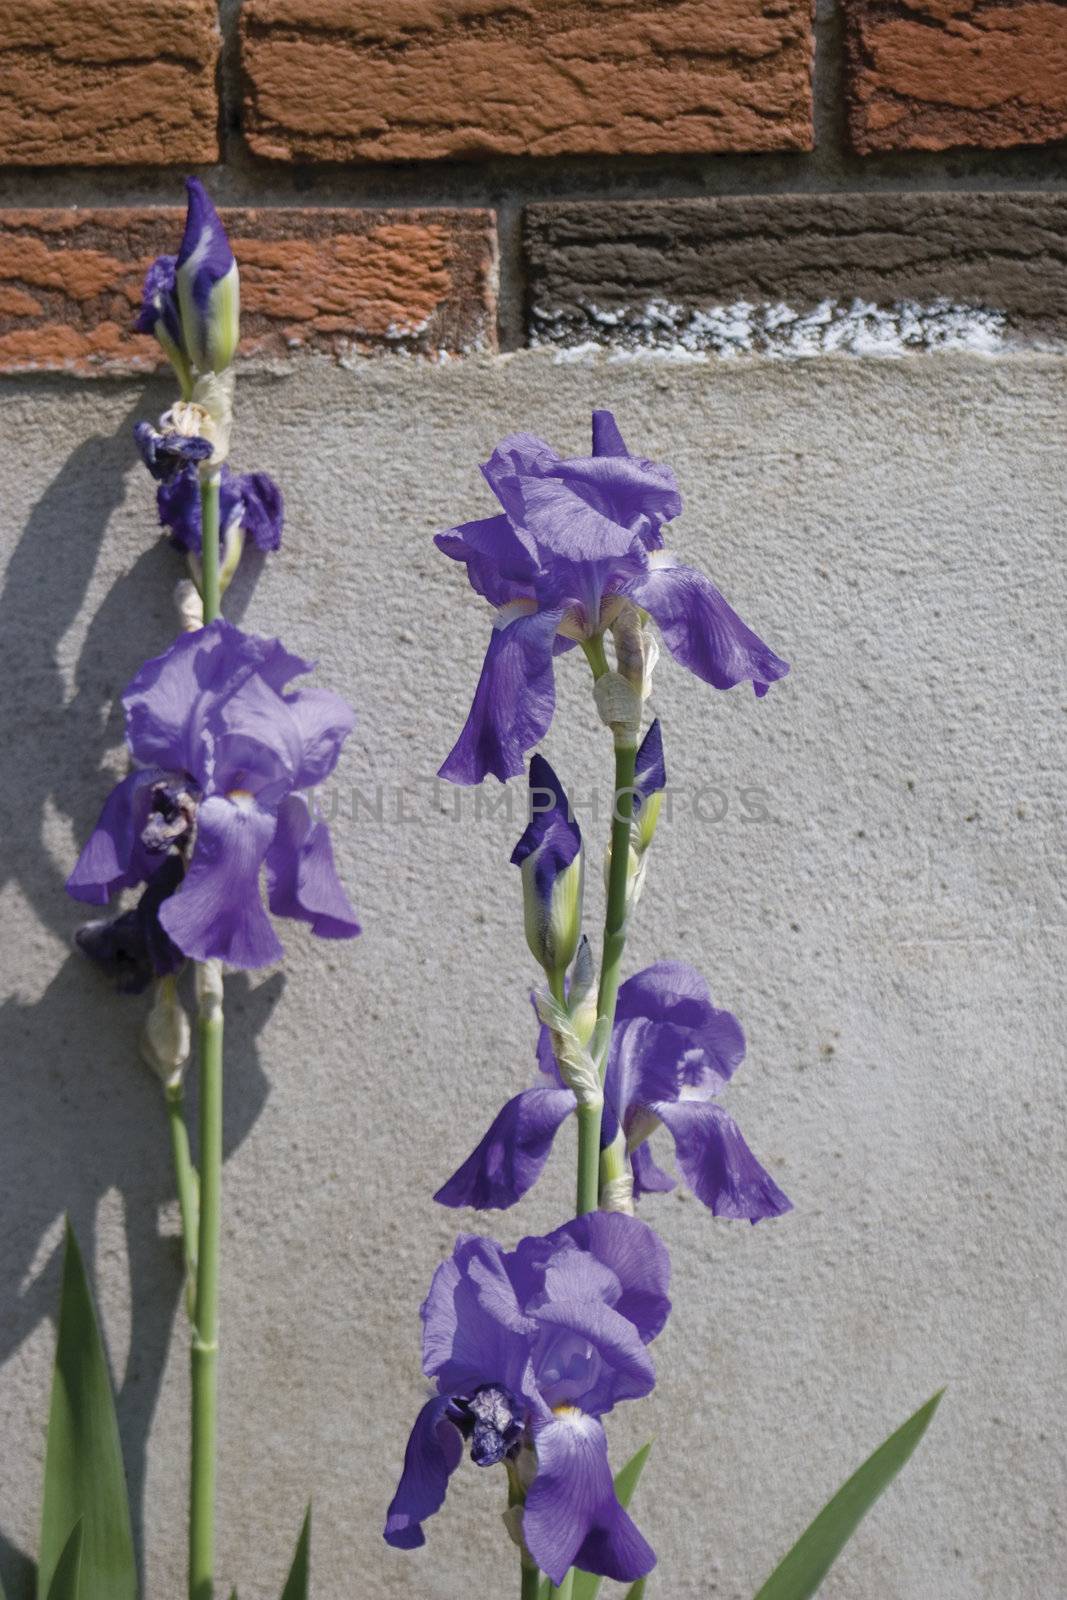 Purple iris flower with brick and ciment background